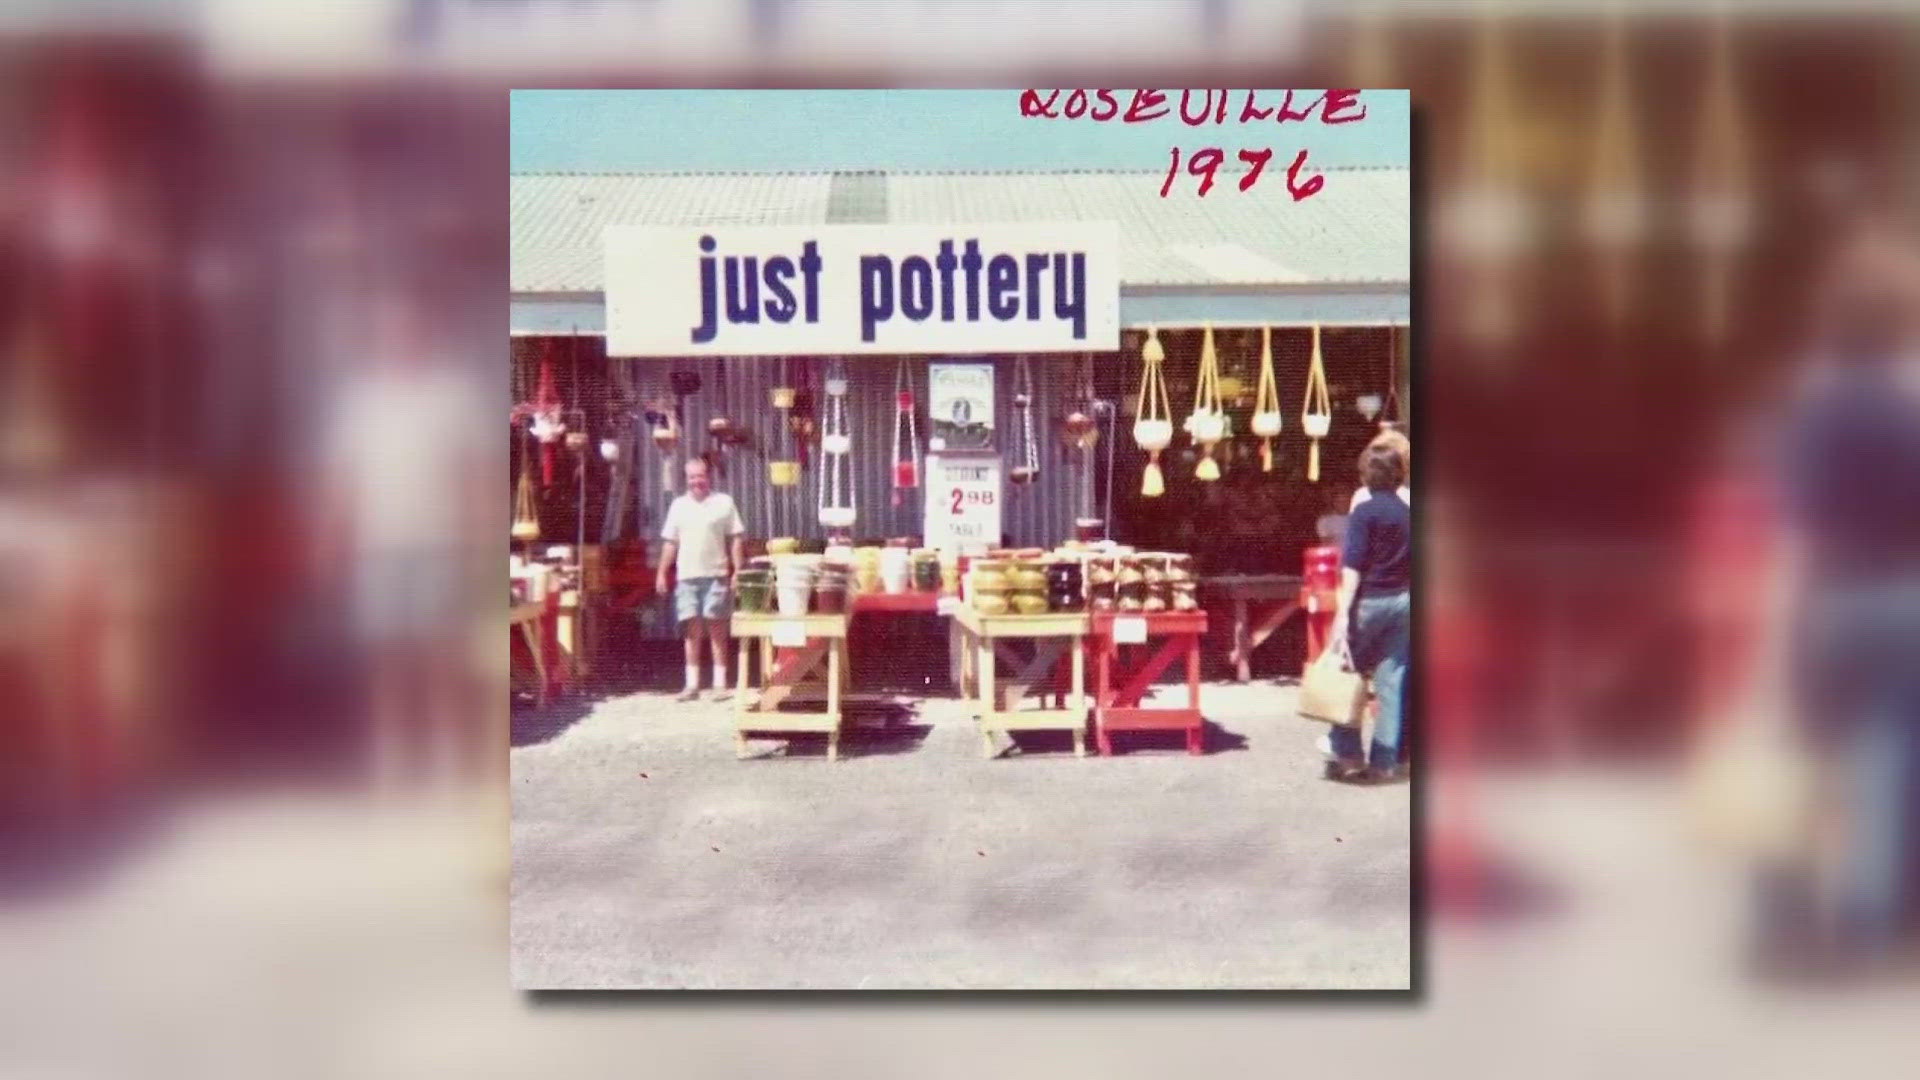 Pottery World in Rocklin is celebrating its 50th anniversary this weekend.